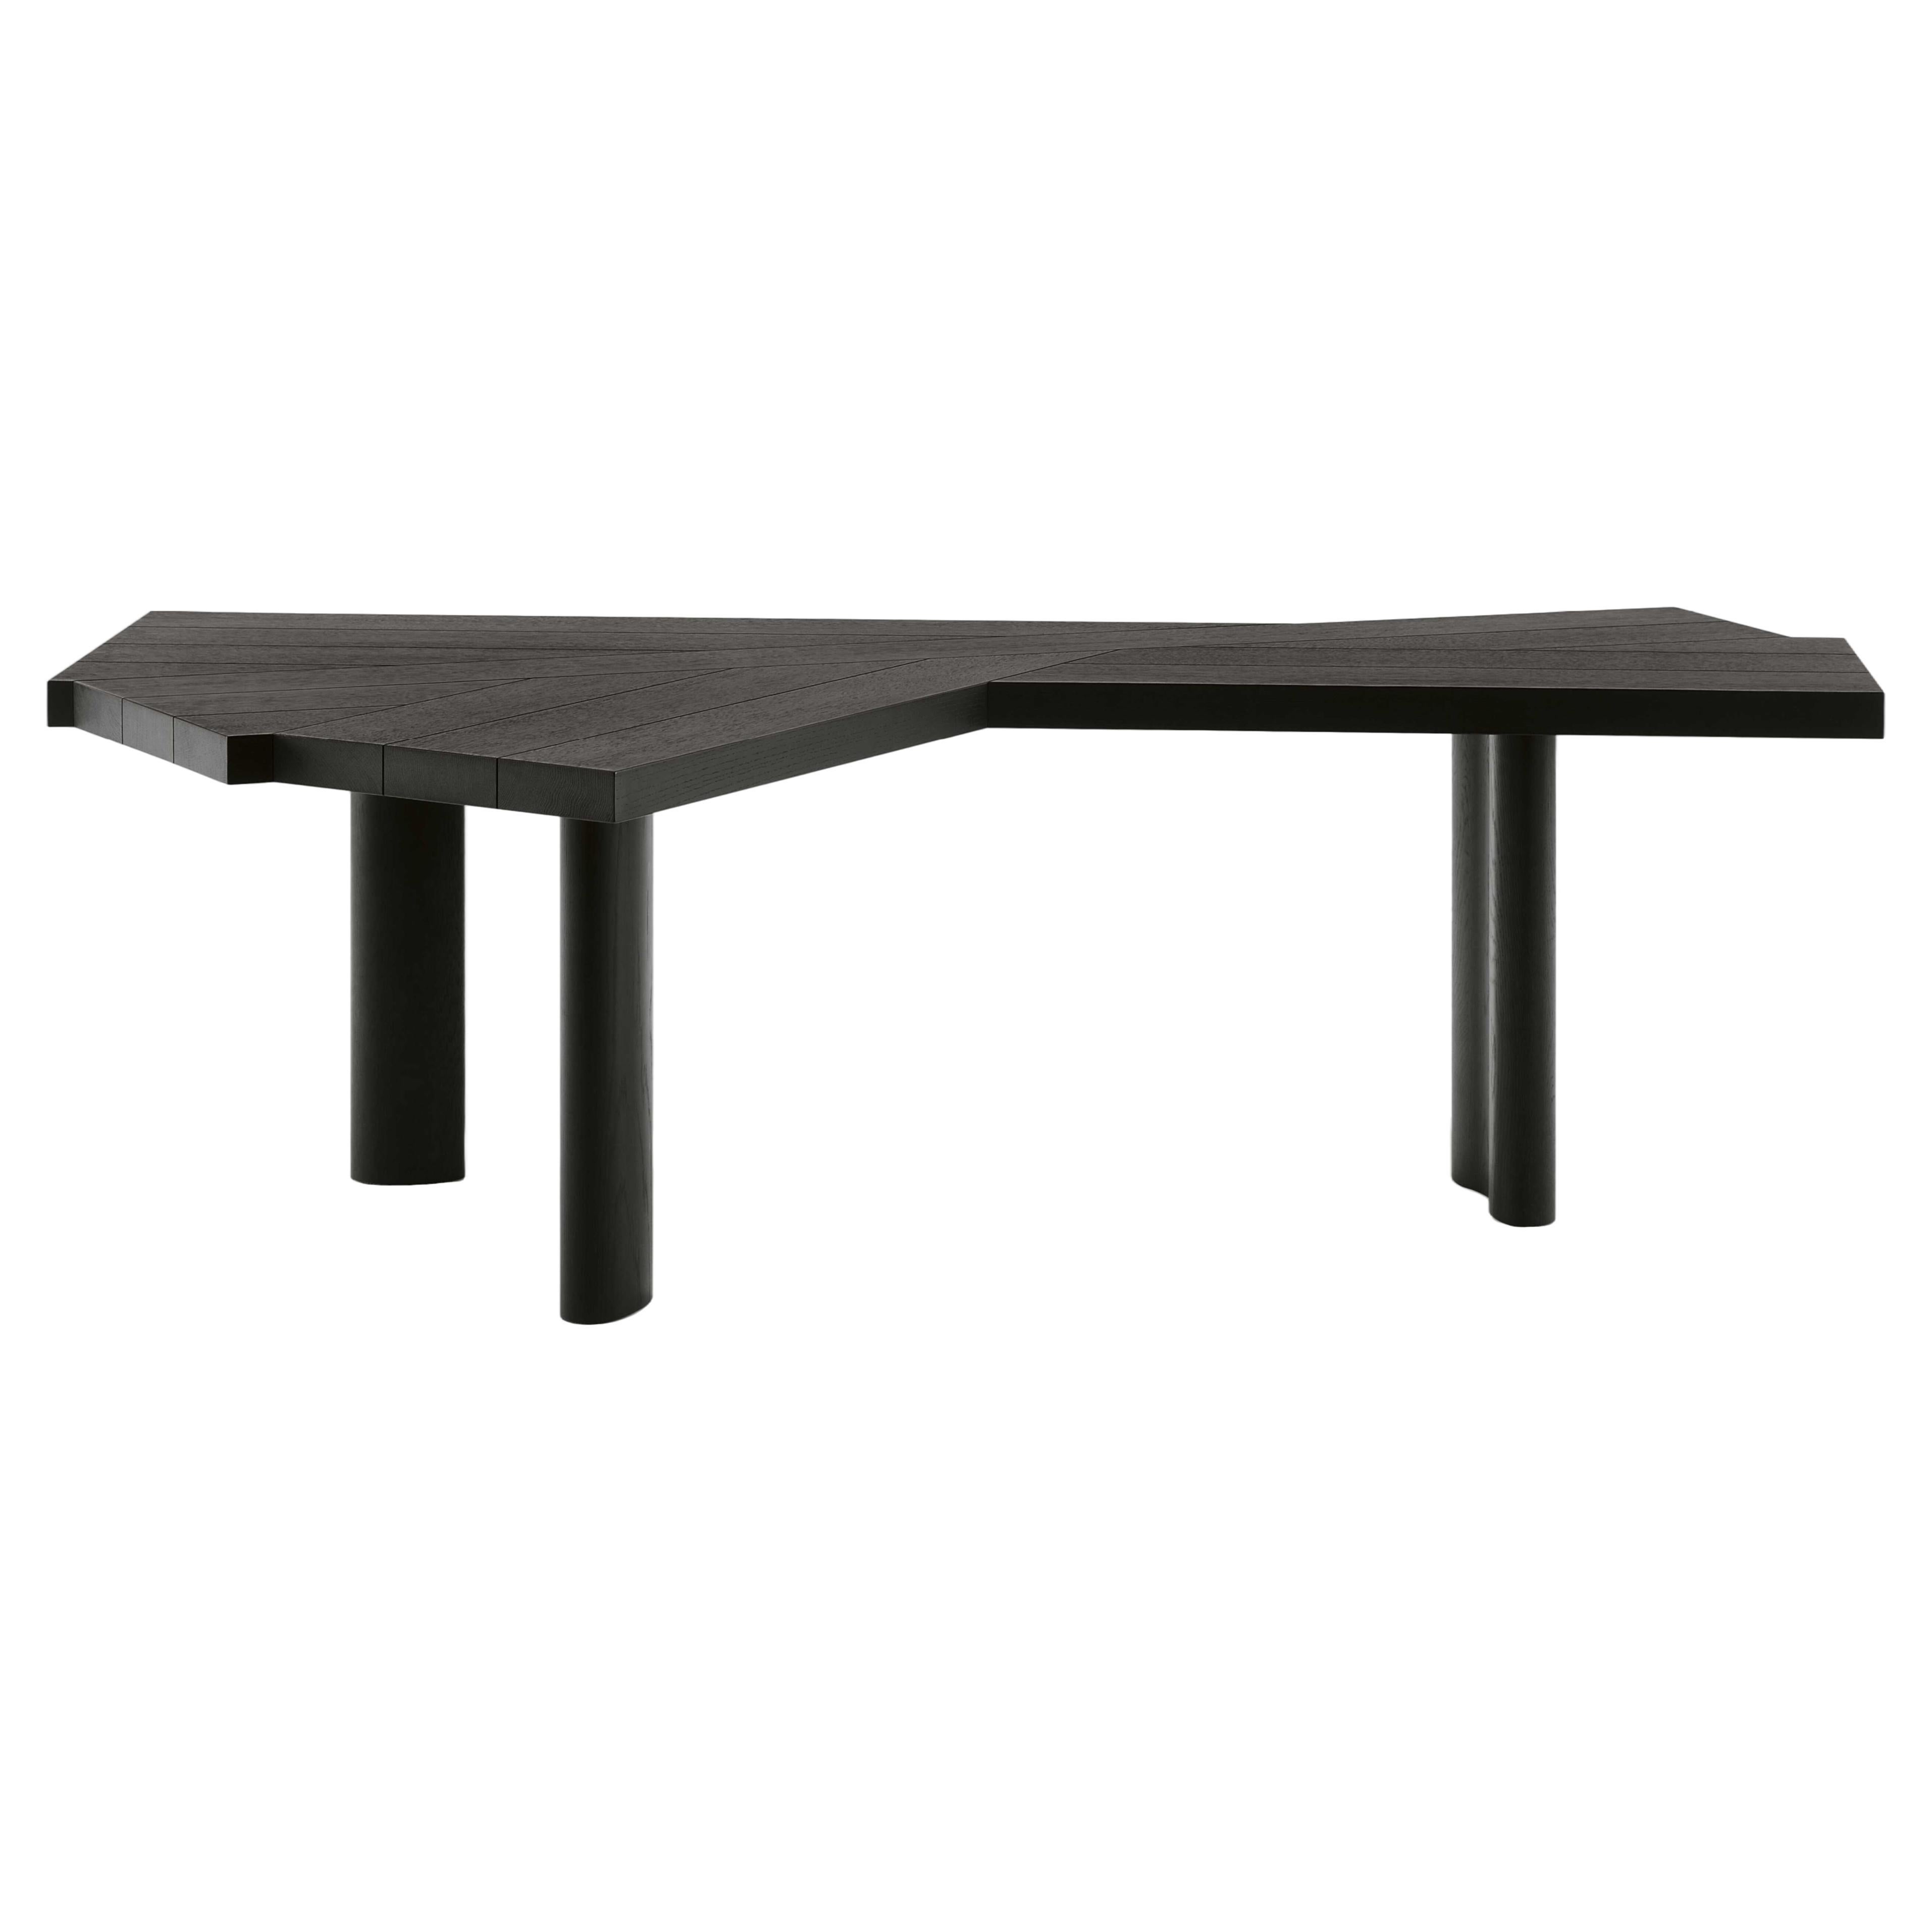 Charlotte Perriand Ventaglio Sculptural Desk or Dining Table for Cassina, new